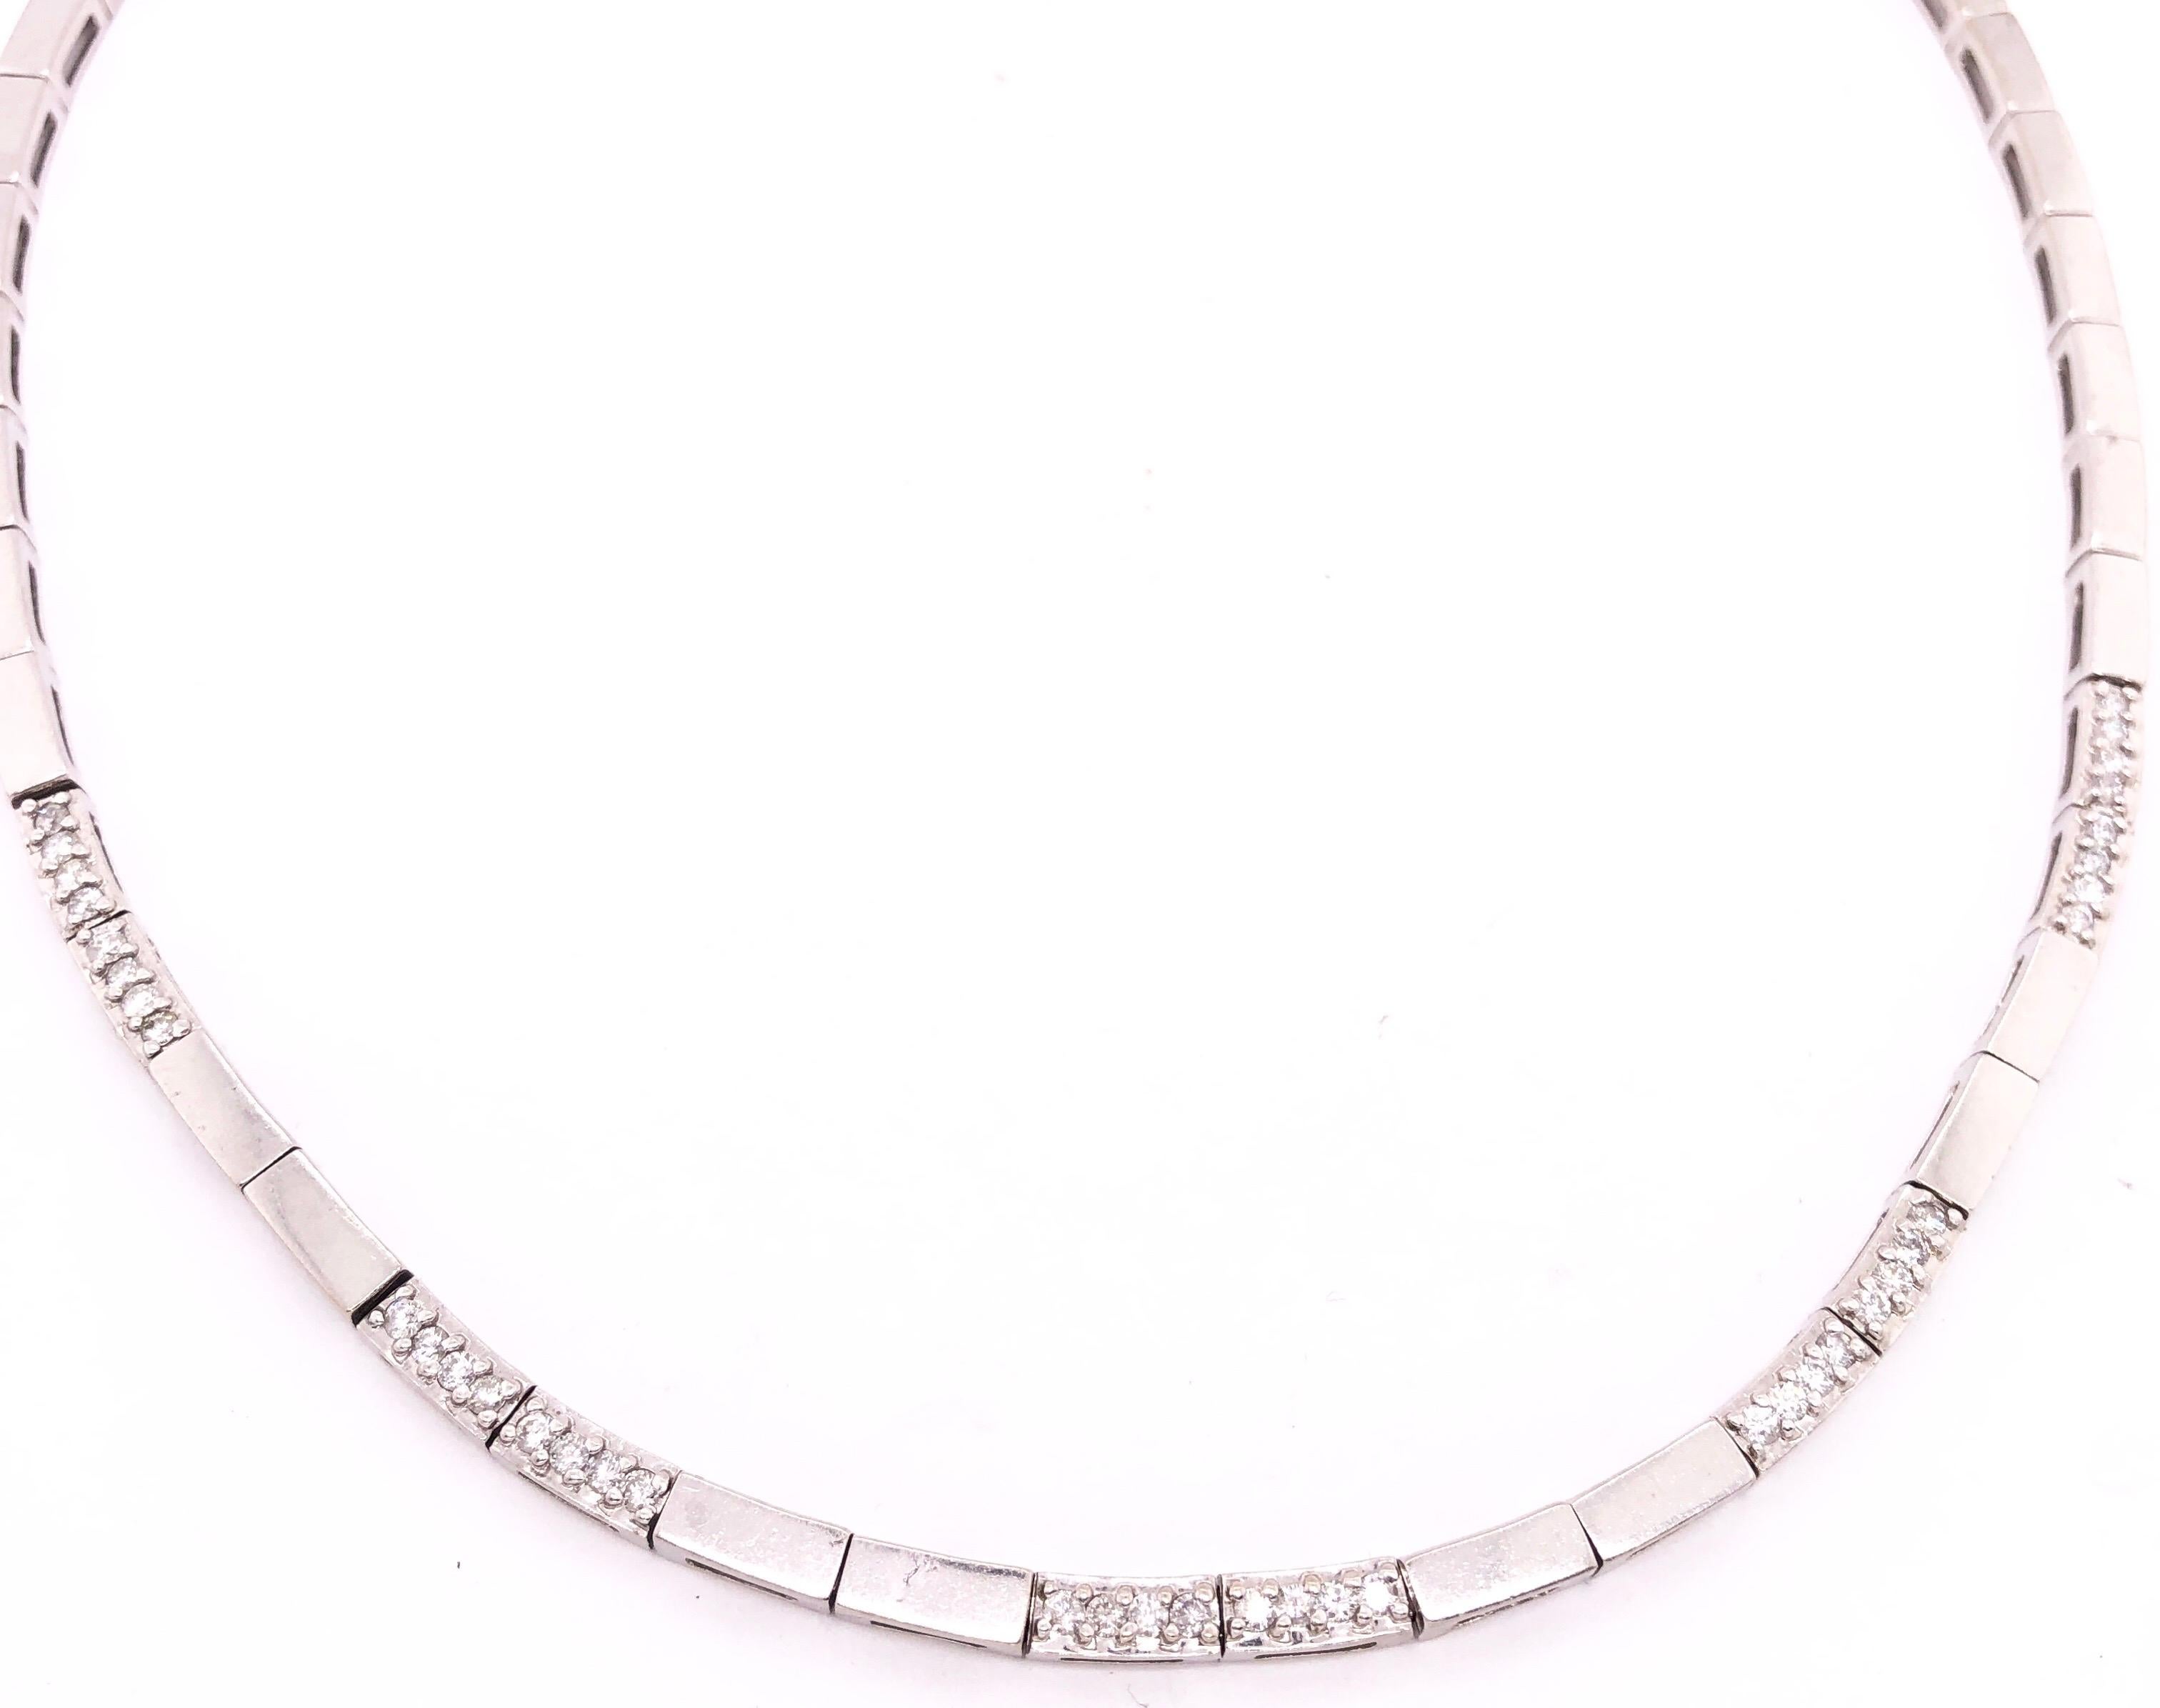 Modern 14 Karat White Gold Fancy Link Necklace with Diamonds For Sale